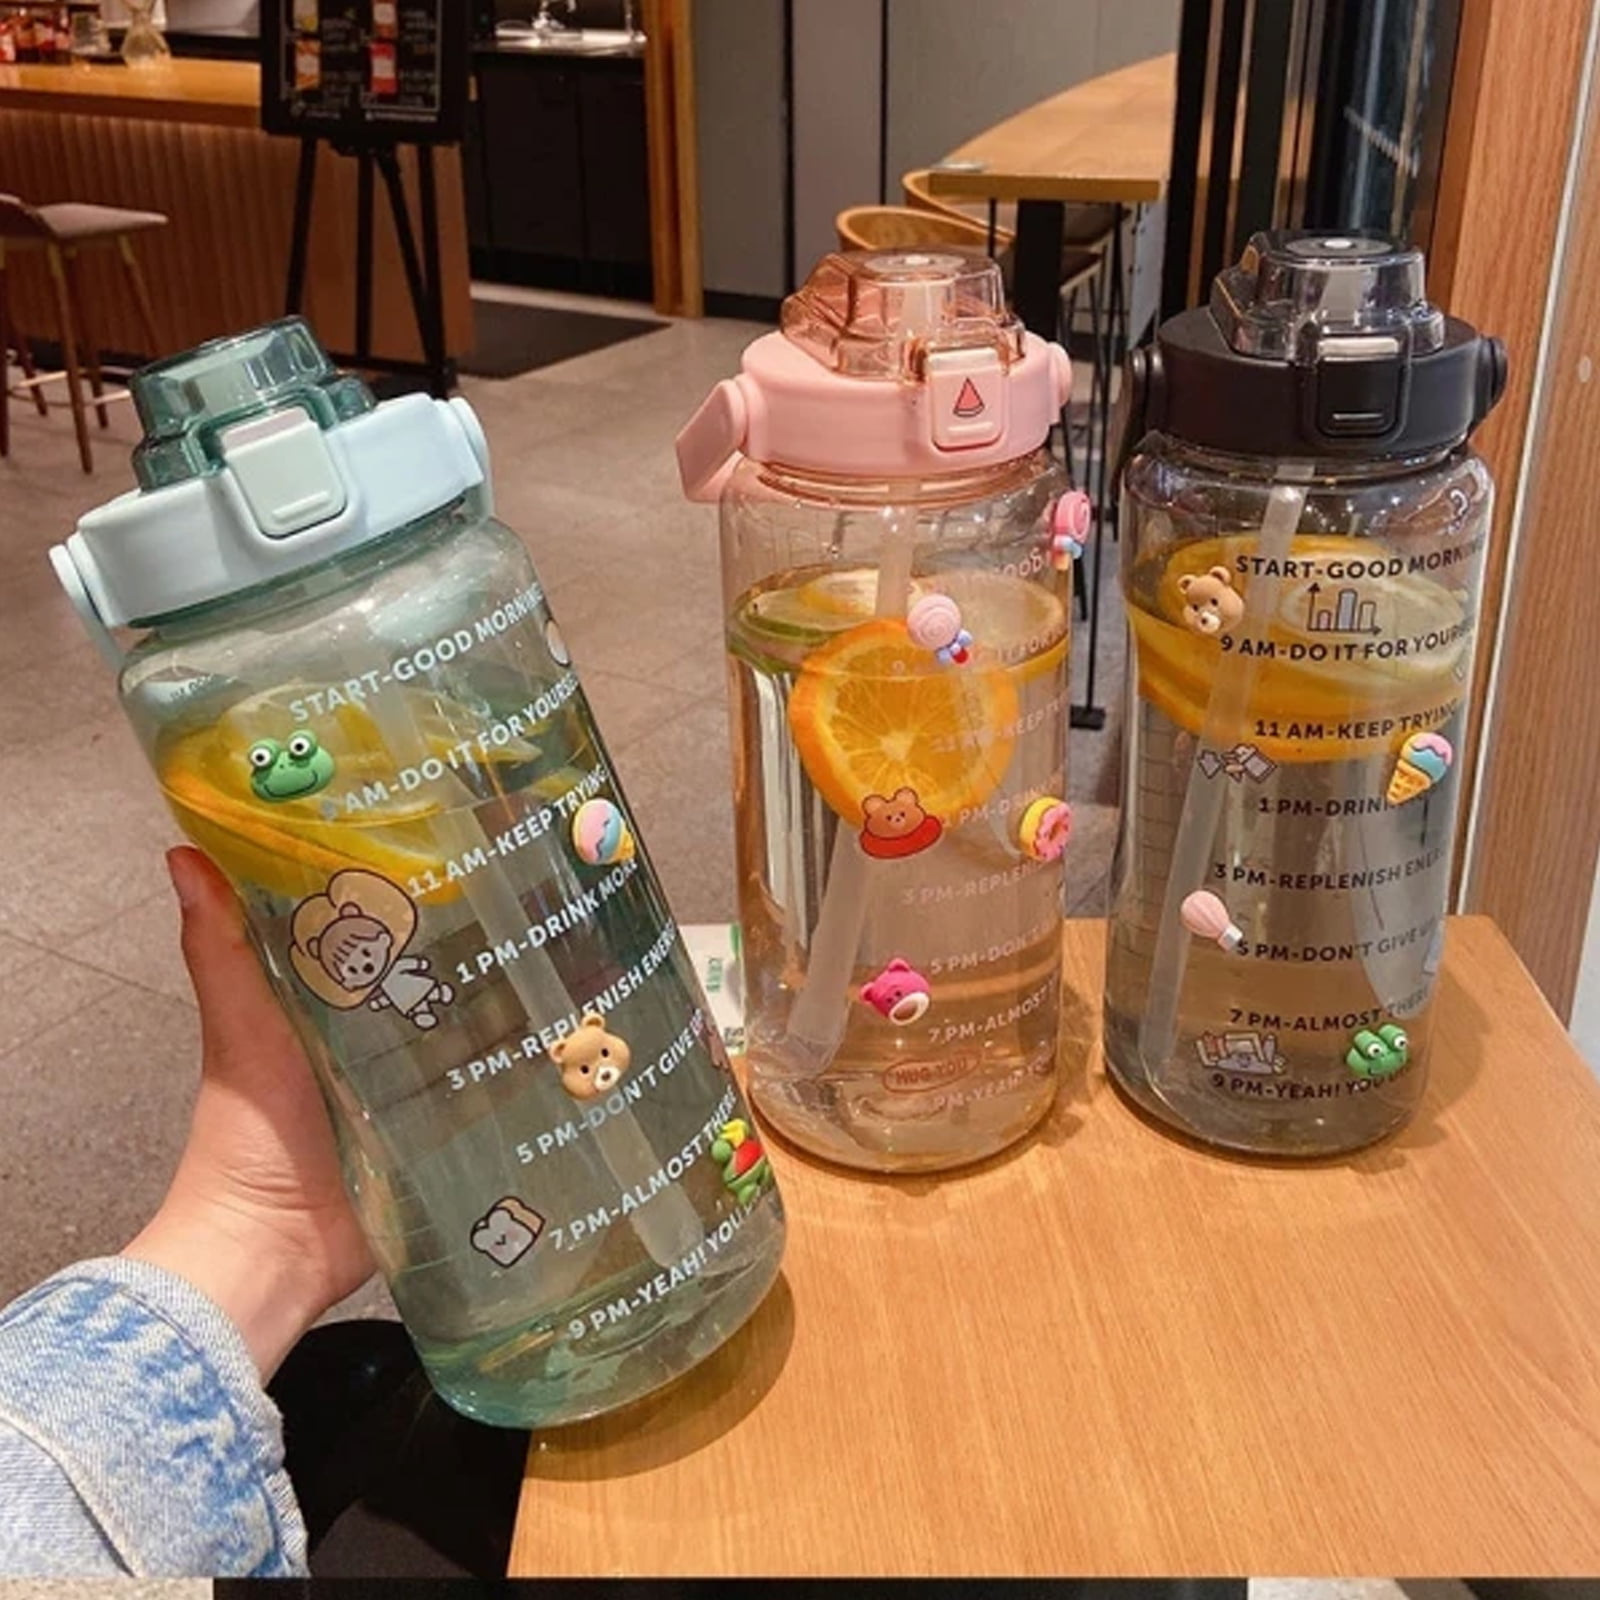 2+0.9 Liter Water Bottle with Straw Girls Large Portable Travel